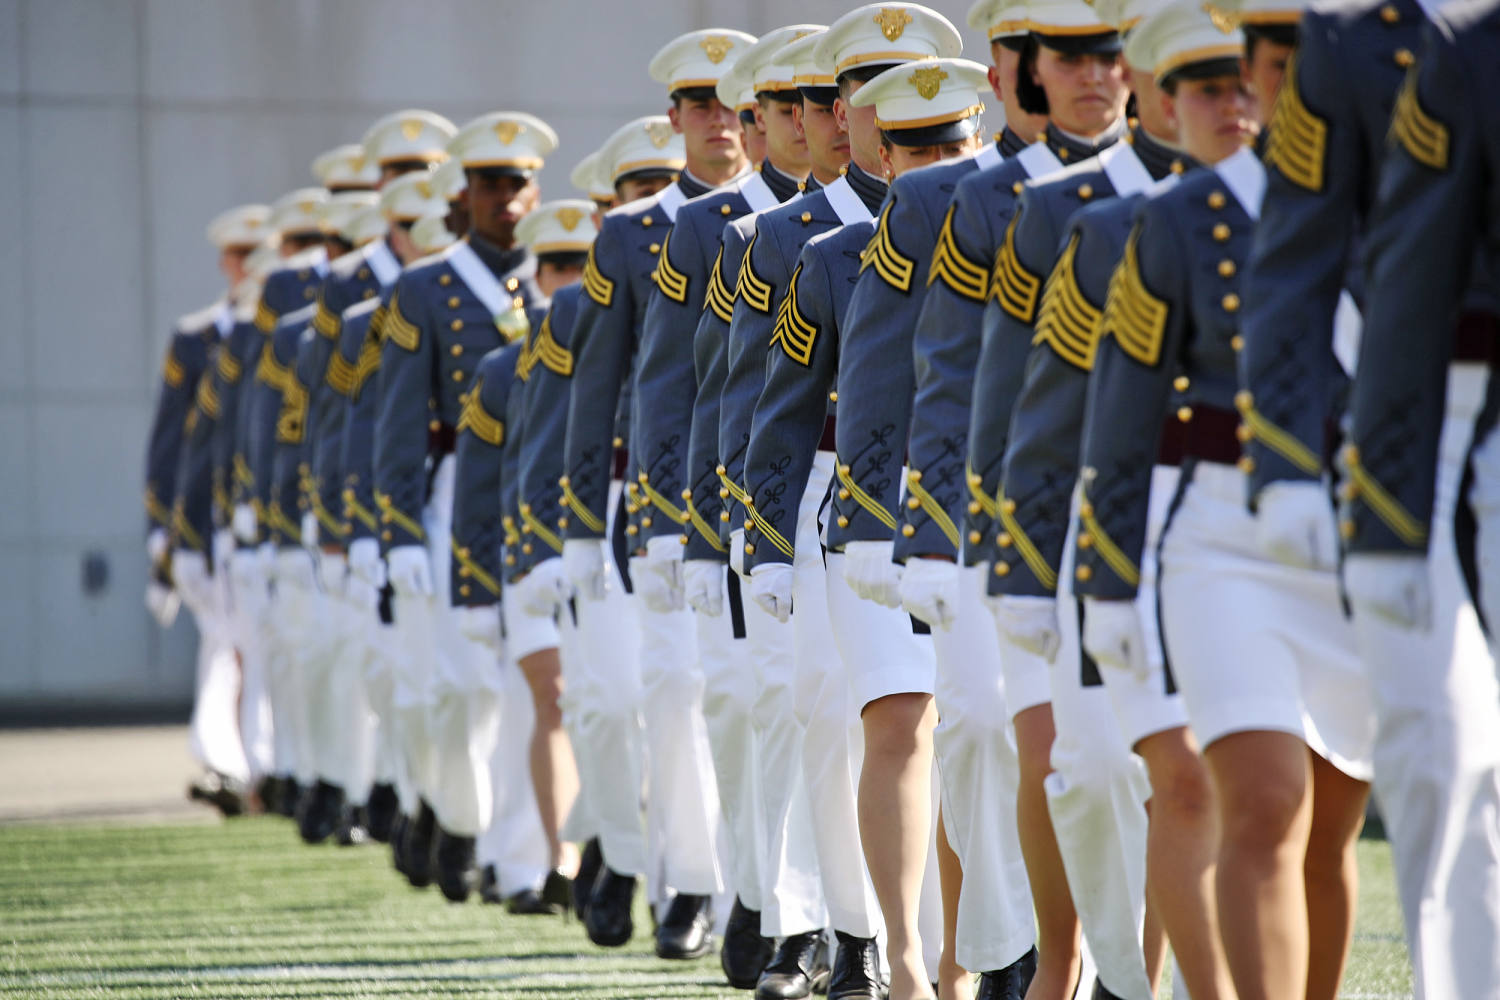 U.S. Military Academy at West Point can continue to consider race in admissions, judge rules